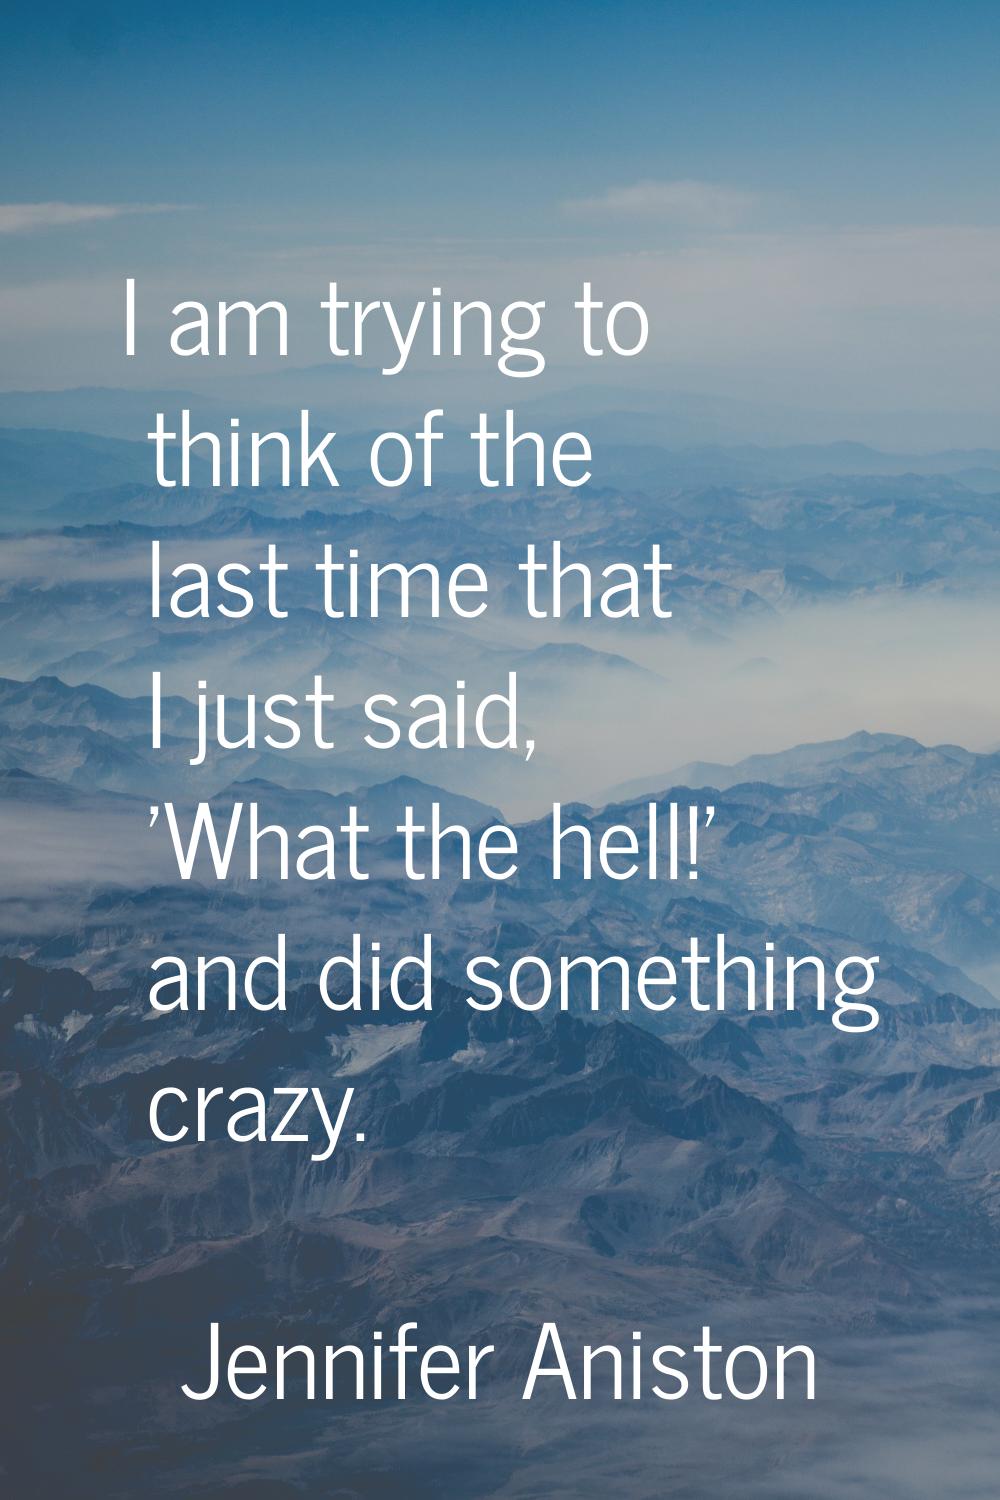 I am trying to think of the last time that I just said, 'What the hell!' and did something crazy.